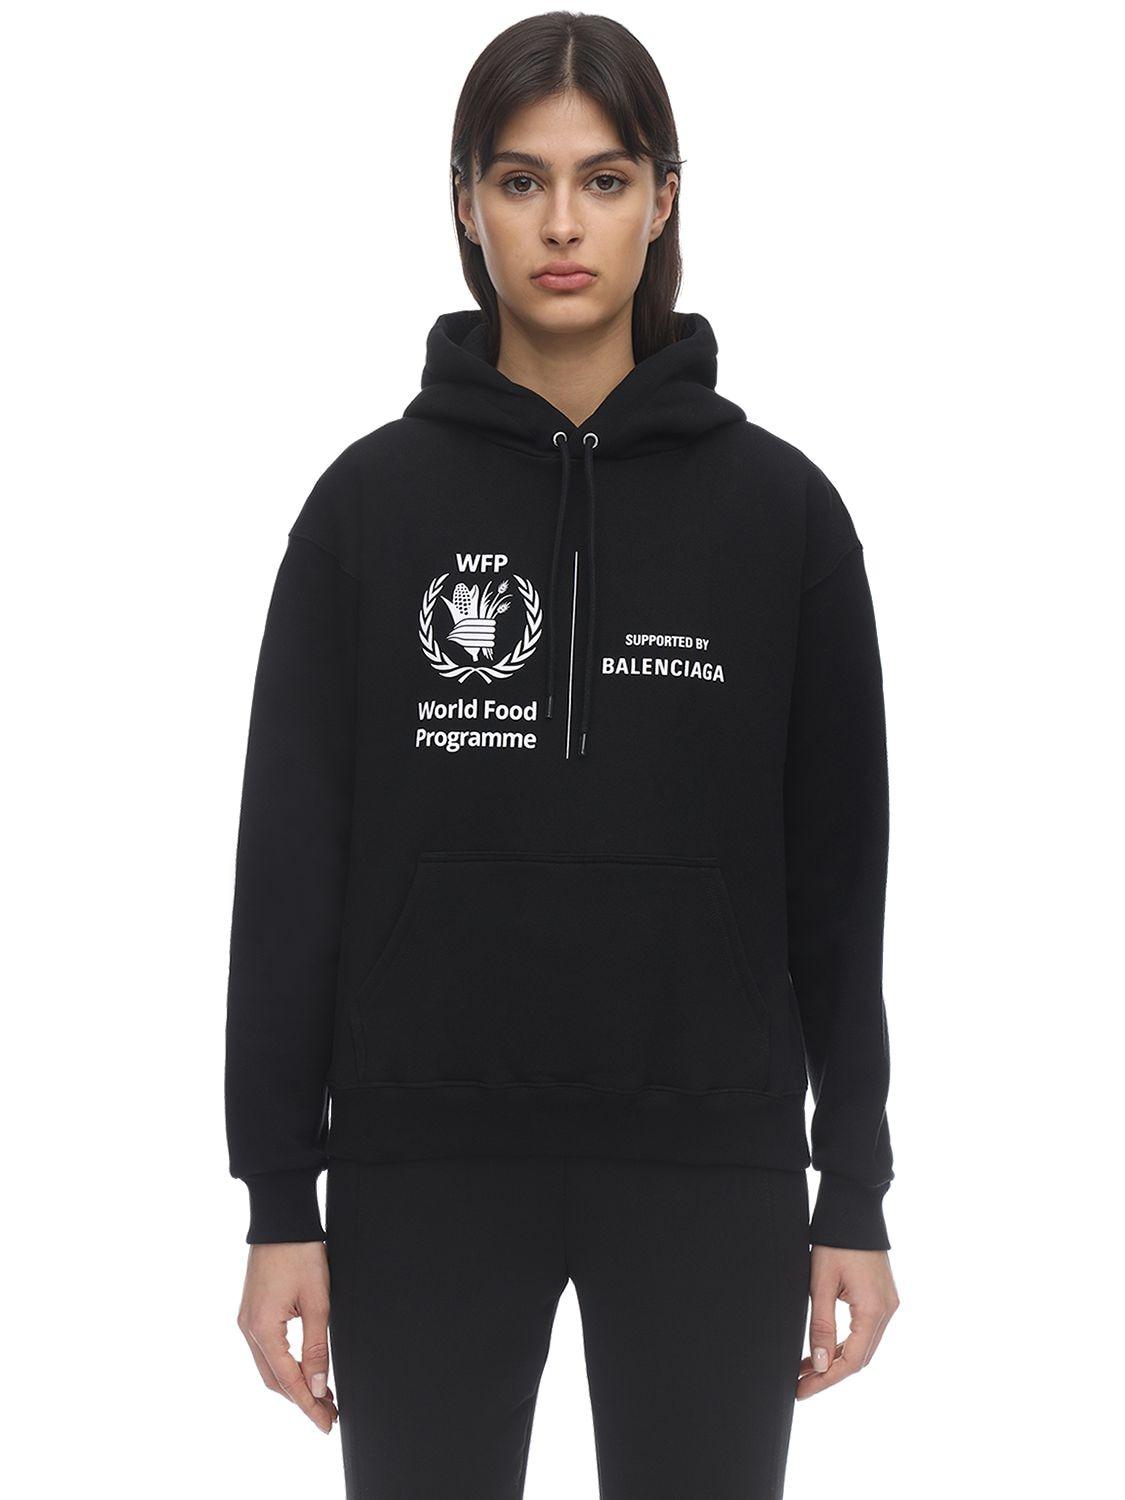 Balenciaga Cotton Cropped World Food Programme Hoodie in Black - Save 53% |  Lyst